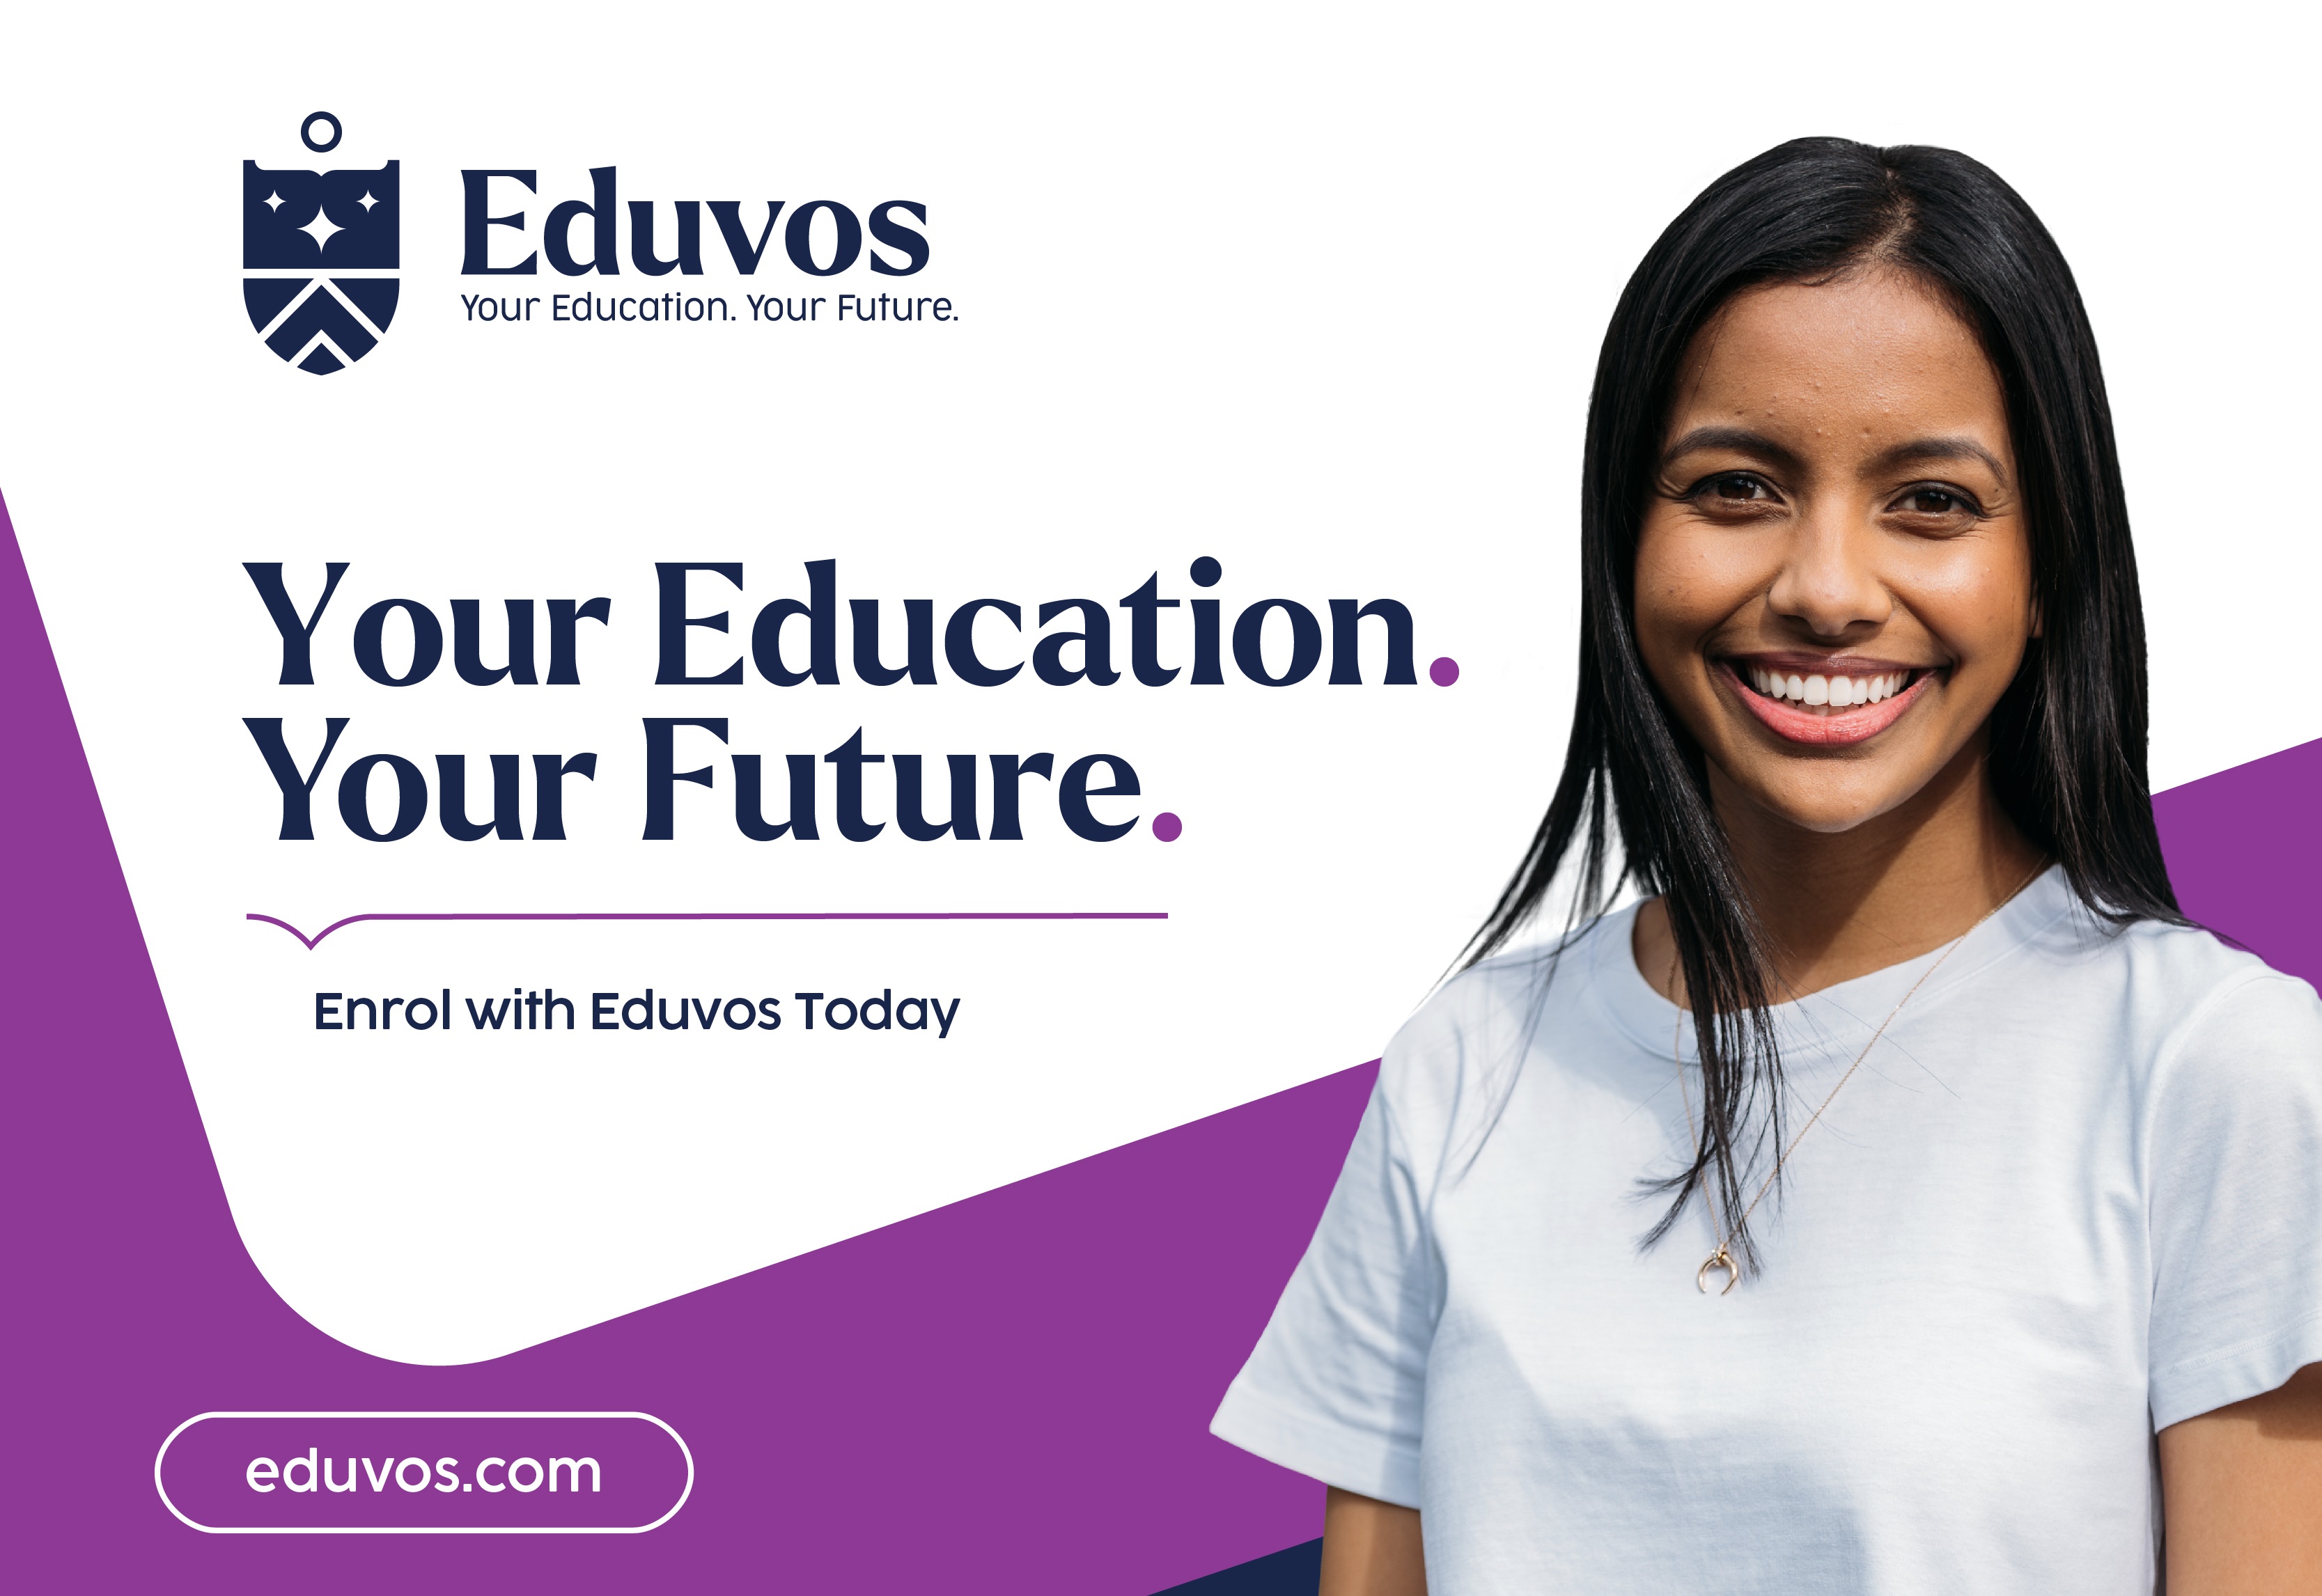 Home Eduvos - Your Education. Your Future.